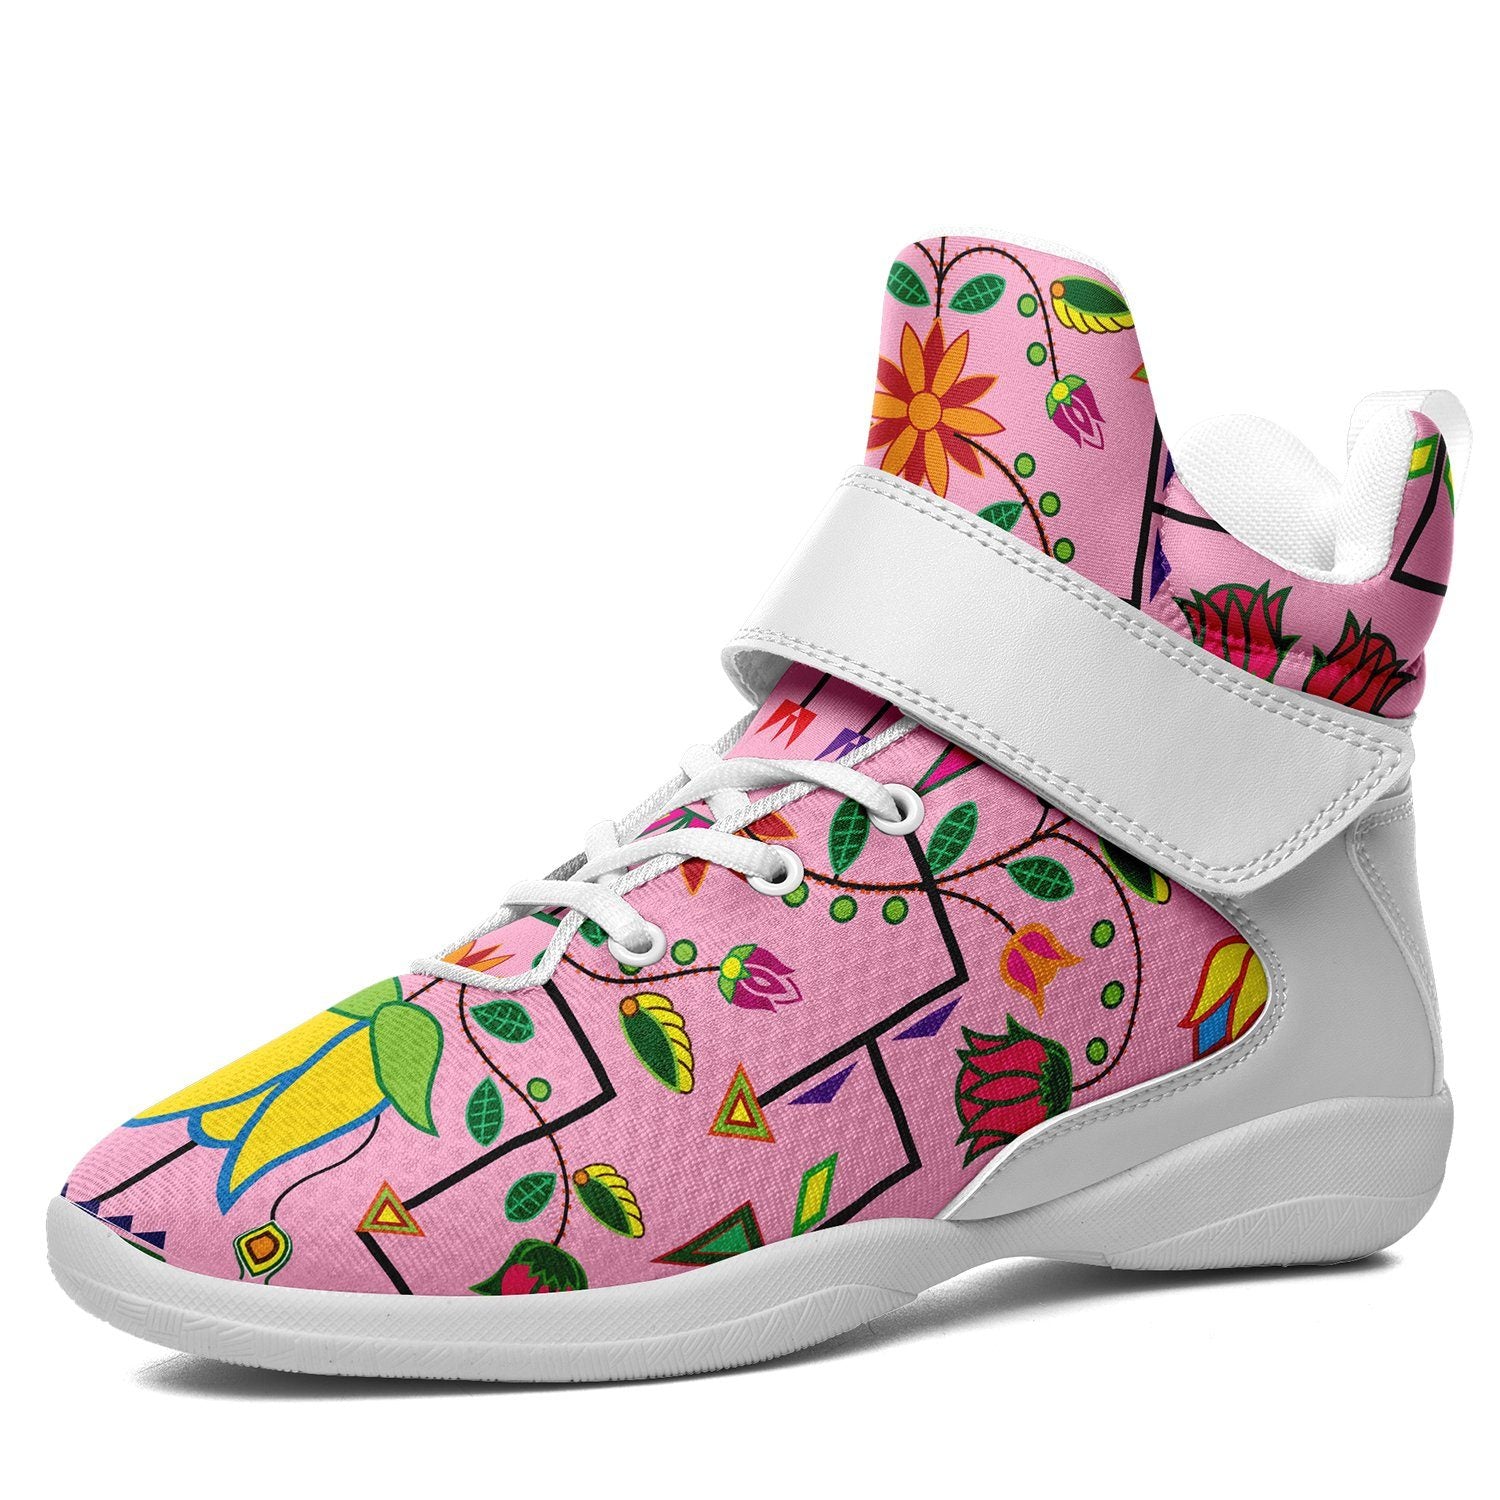 Geometric Floral Summer Sunset Kid's Ipottaa Basketball / Sport High Top Shoes 49 Dzine US Women 4.5 / US Youth 3.5 / EUR 35 White Sole with White Strap 